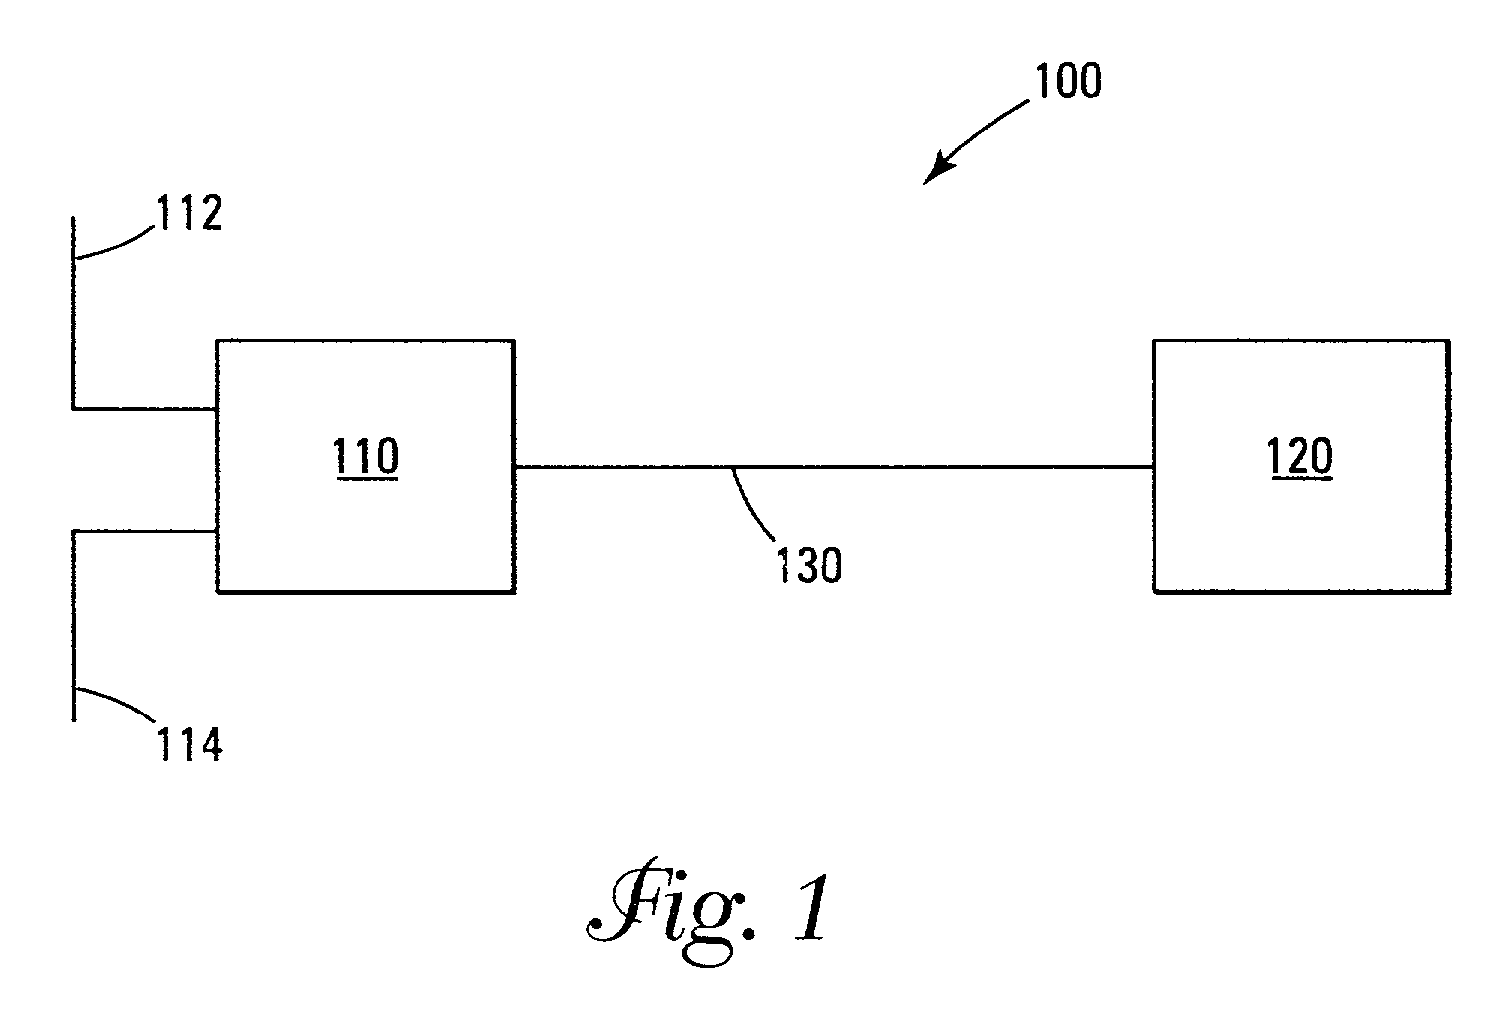 Concurrent transmission of traffic from multiple communication interfaces